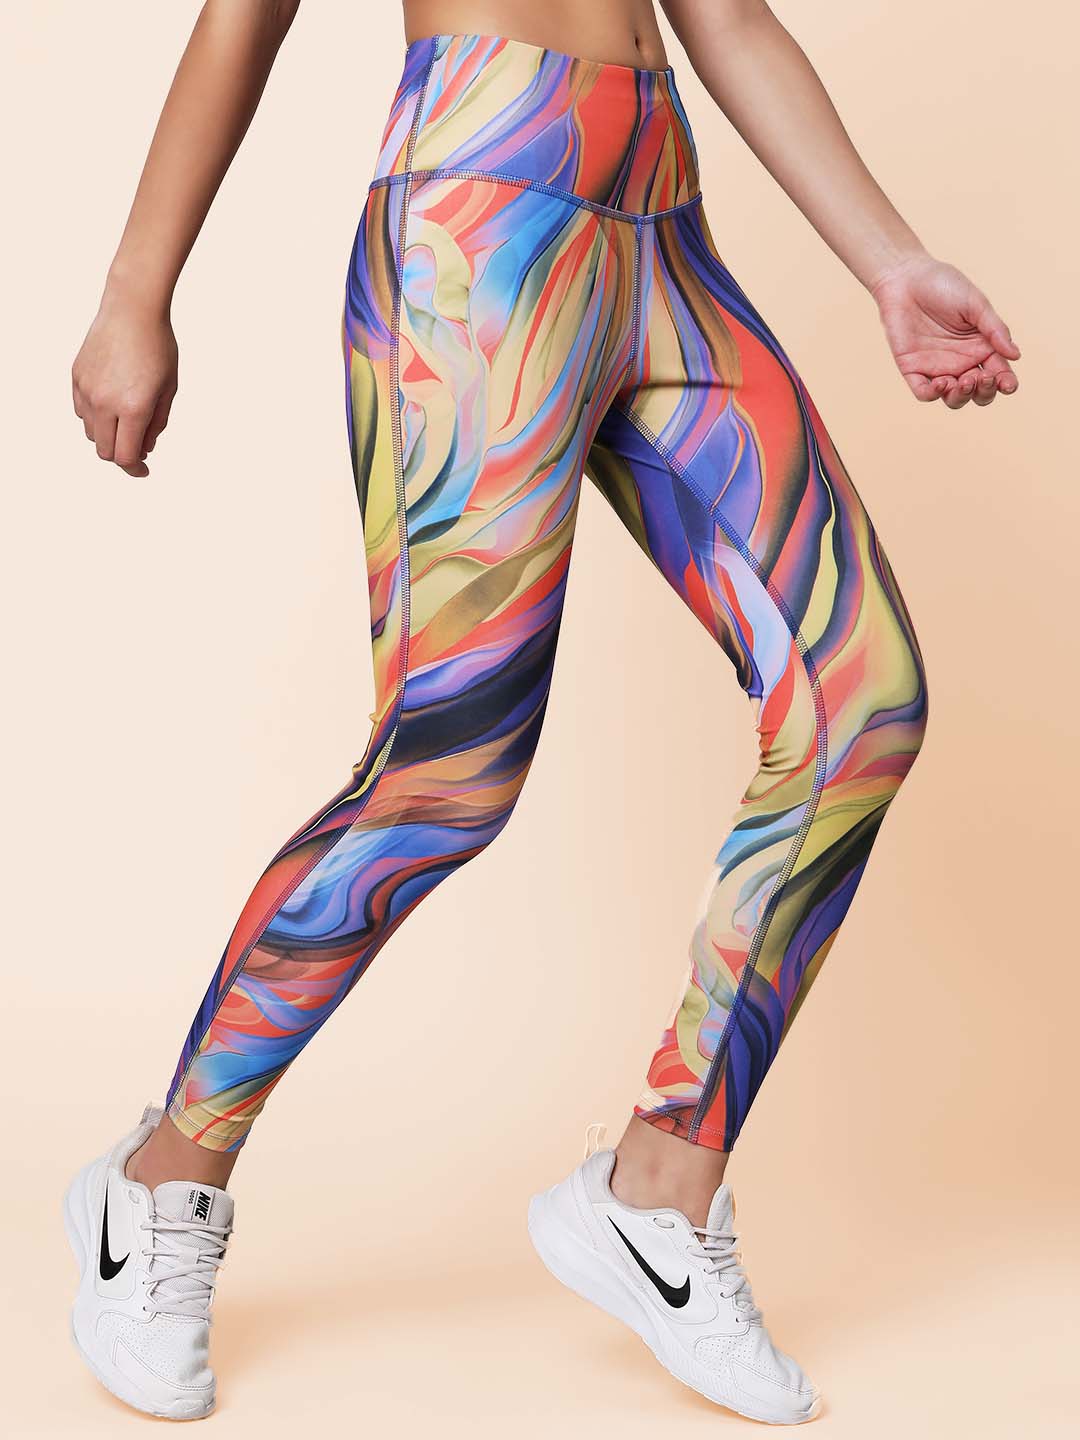 Women's 7/8 yoga leggings made of recycled materials